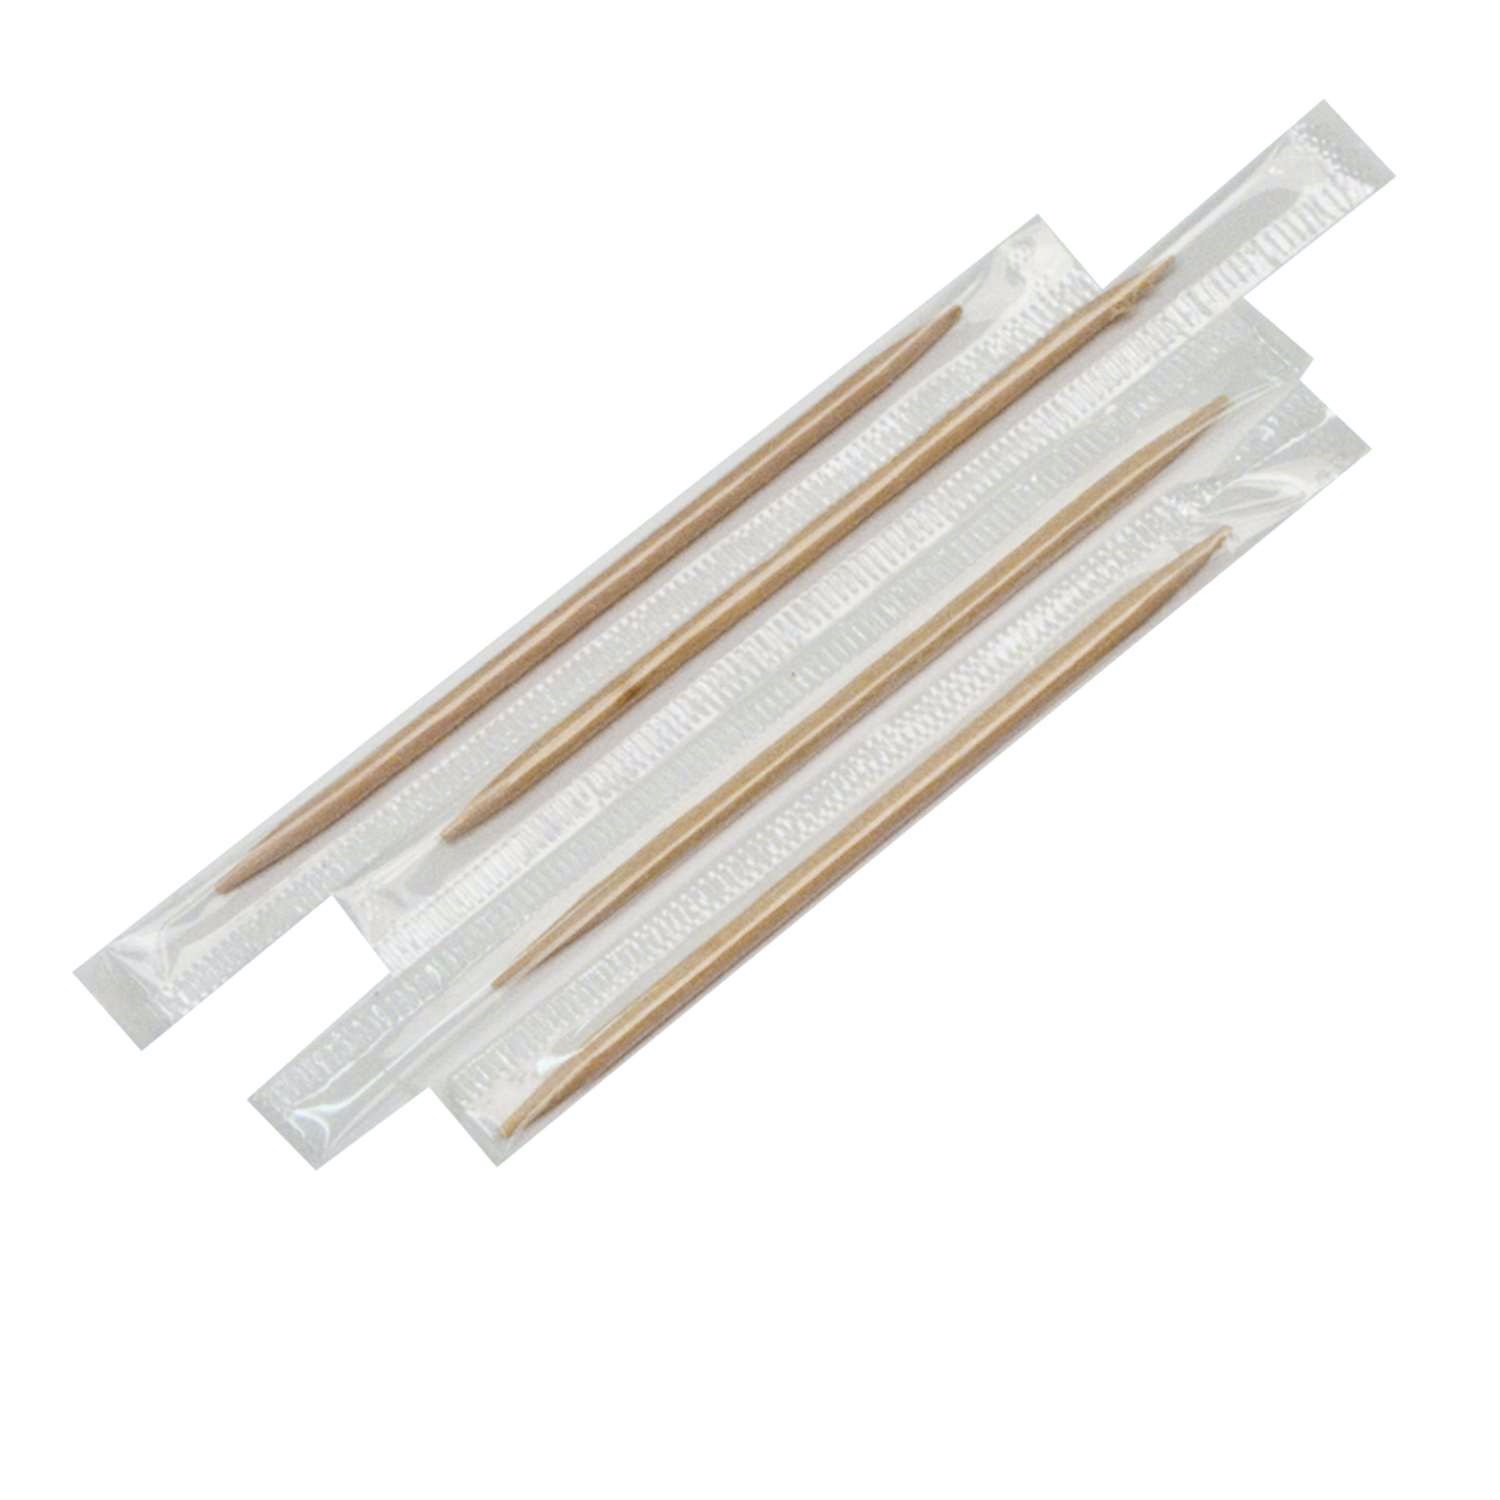 INDIVIDUAL Wrapped TOOTHPICKS-PLAIN 1000 CT